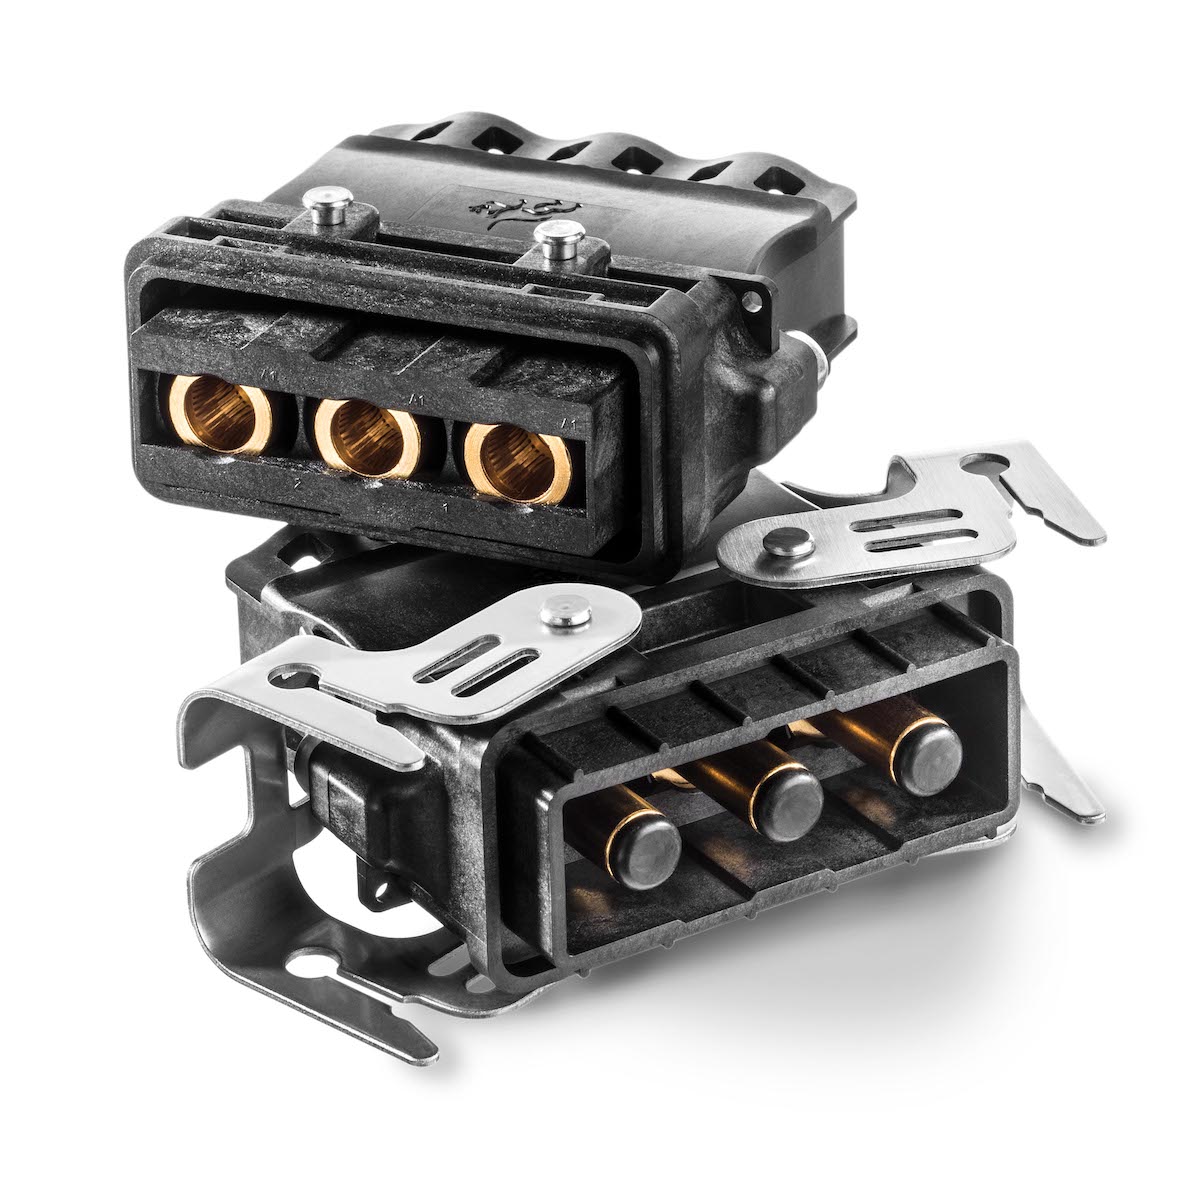 the Panther connector product family from Positronic for off-highway equipment